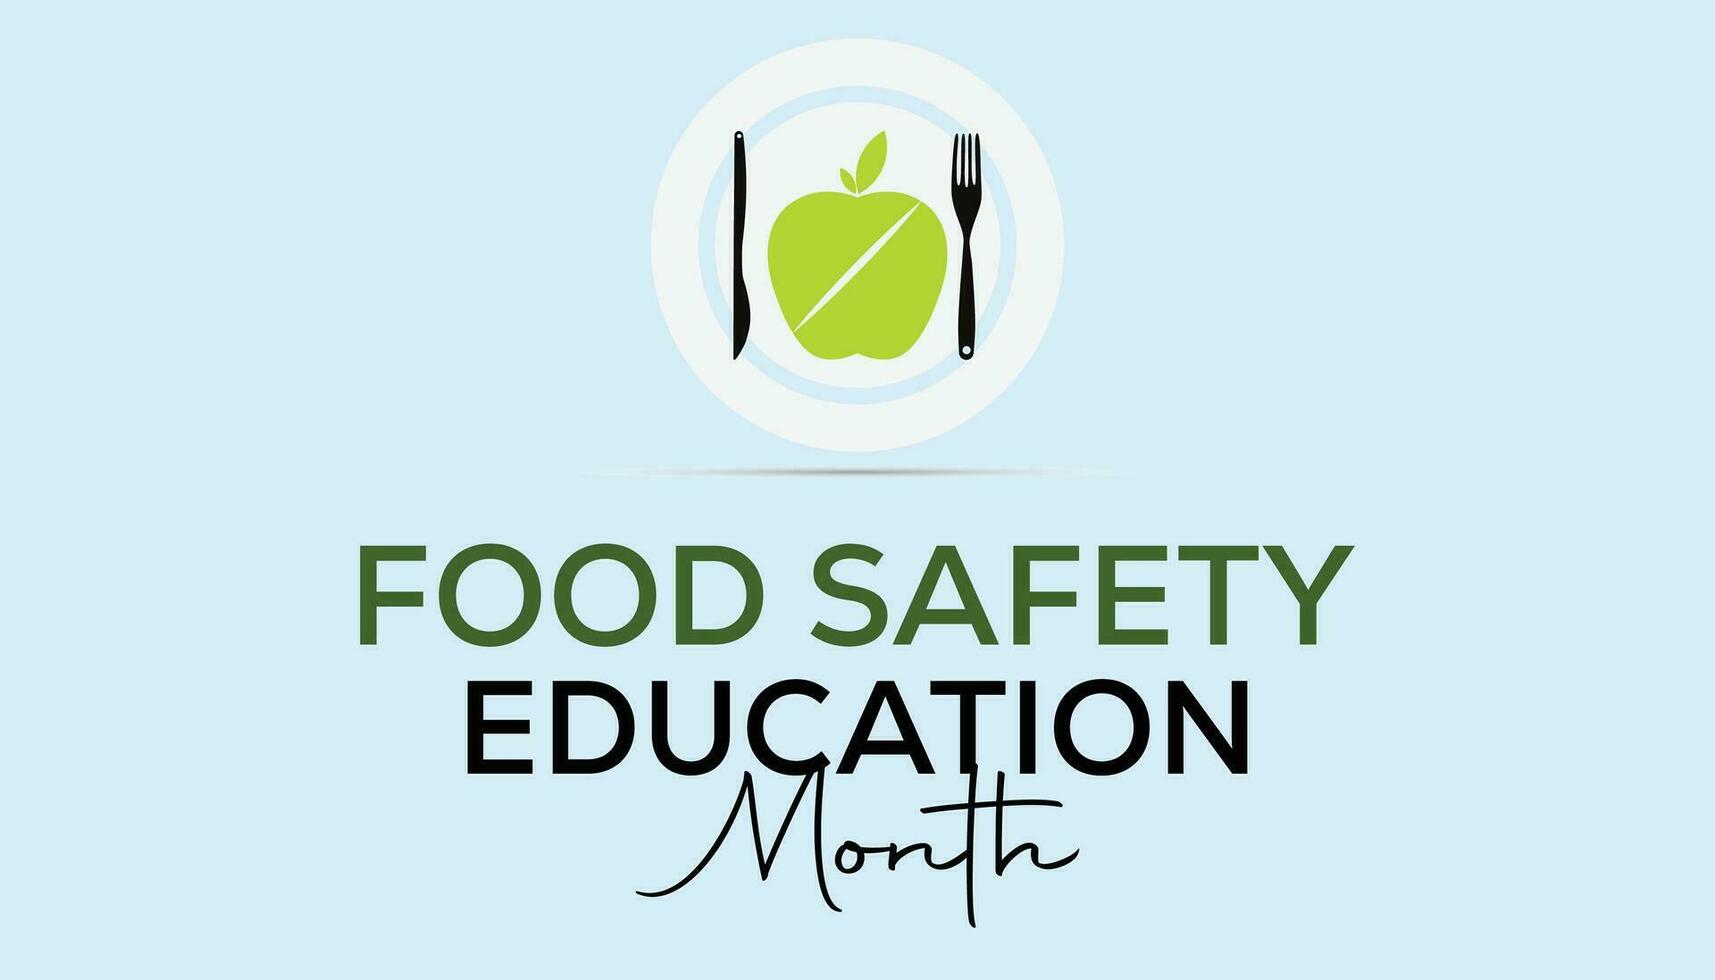 Food Safety education month observed each year during September . Vector illustration on the theme of .